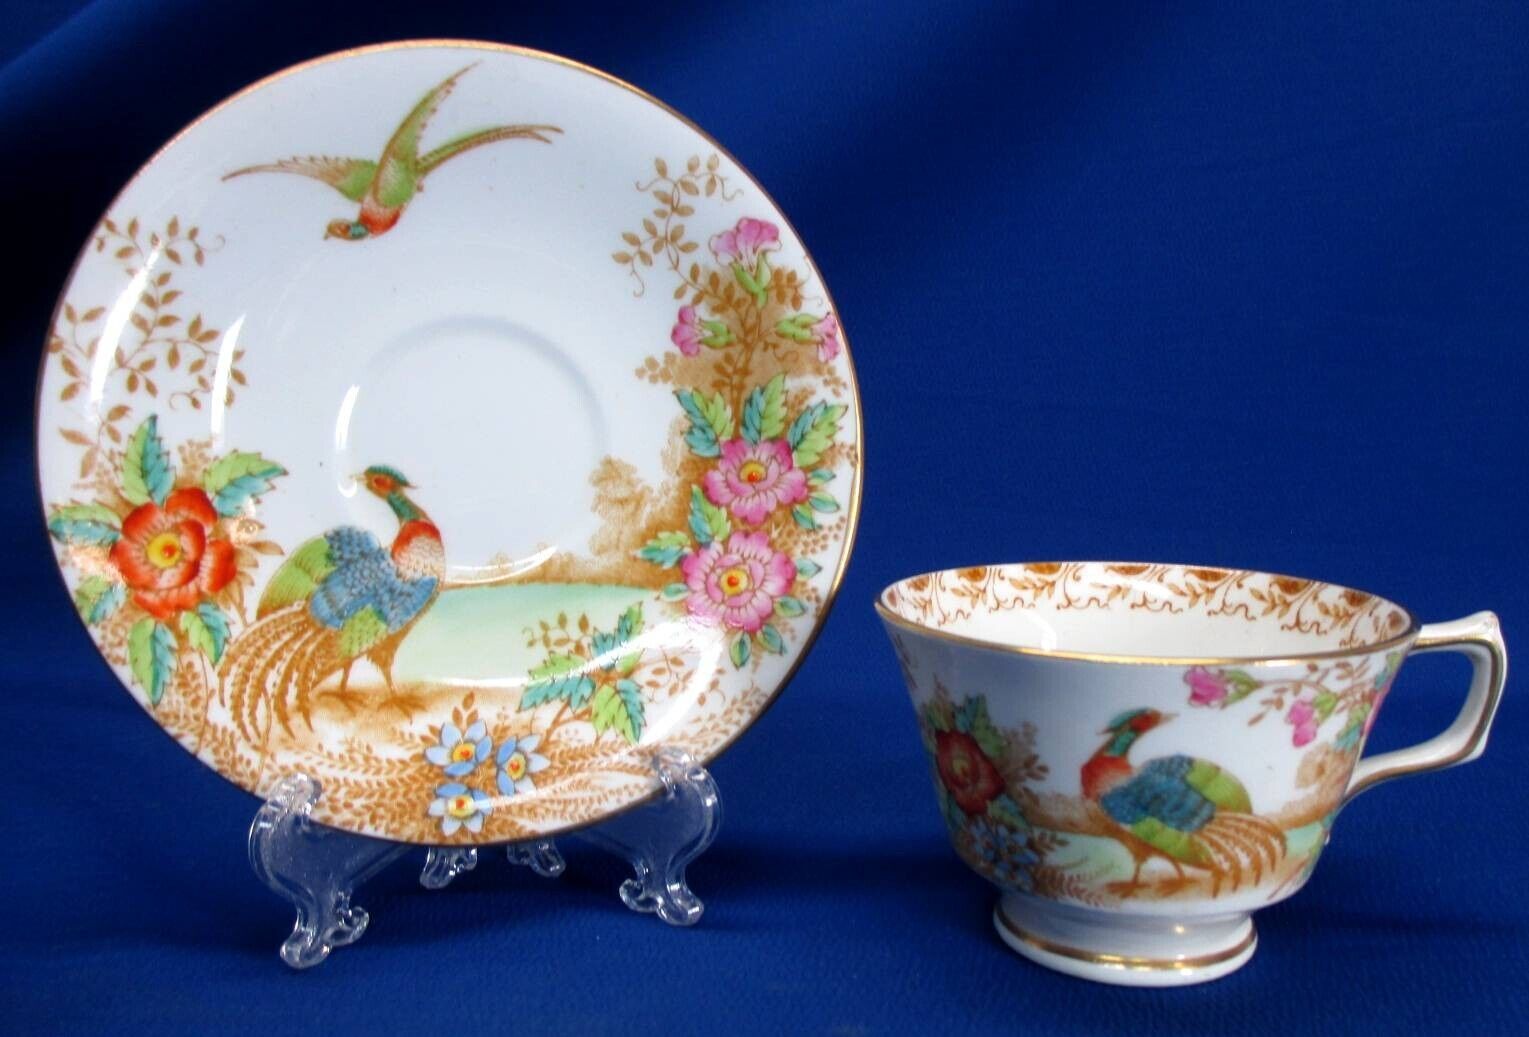 ENGLISH SUTHERLAND BONE CHINA CUP & SAUCER IN EXOTIC PATTERN